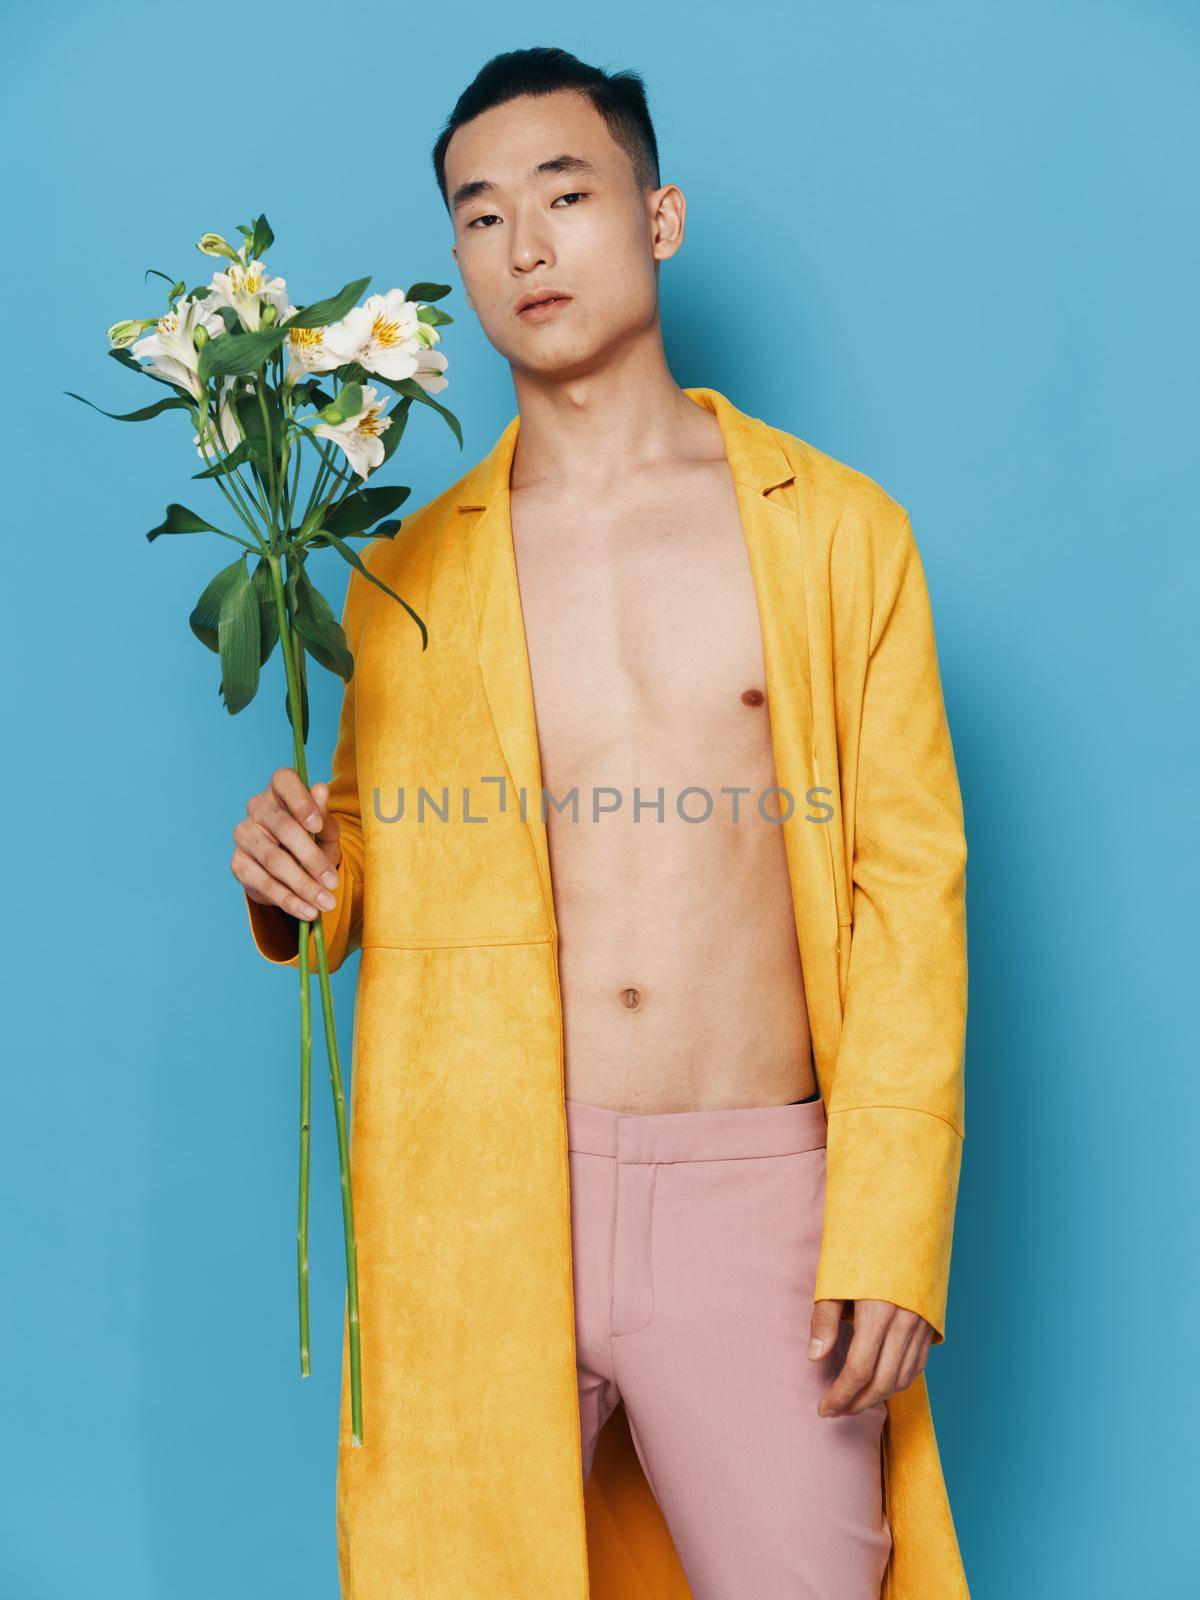 Asian man with a bouquet of white flowers gifts holidays. High quality photo